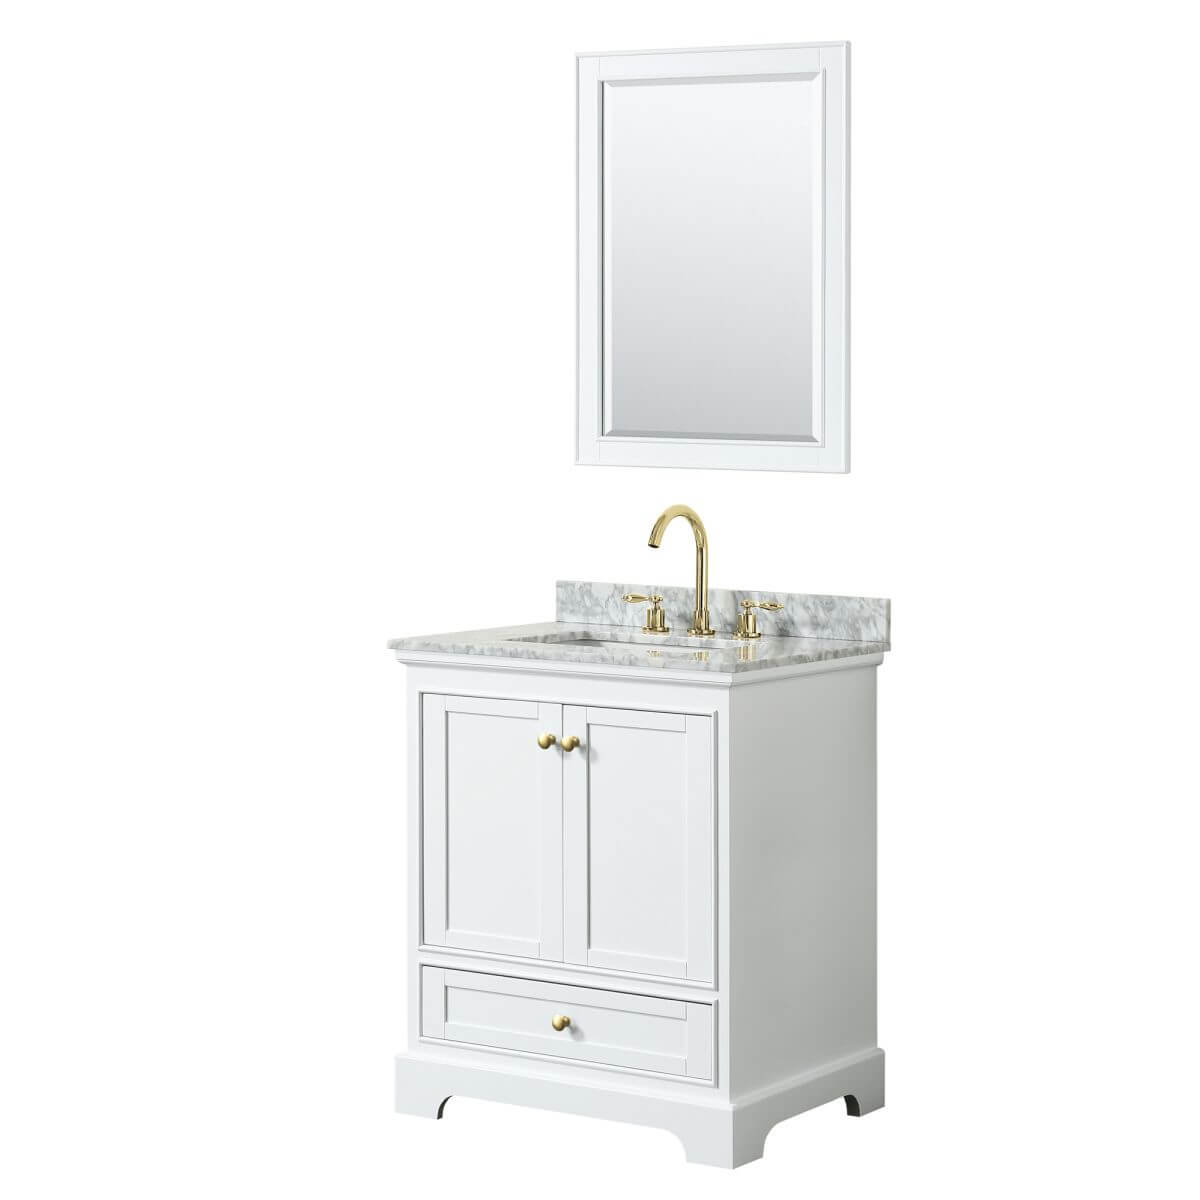 Wyndham Collection Deborah 30 inch Single Bathroom Vanity in White with White Carrara Marble Countertop, Undermount Square Sink, Brushed Gold Trim and 24 inch Mirror - WCS202030SWGCMUNSM24